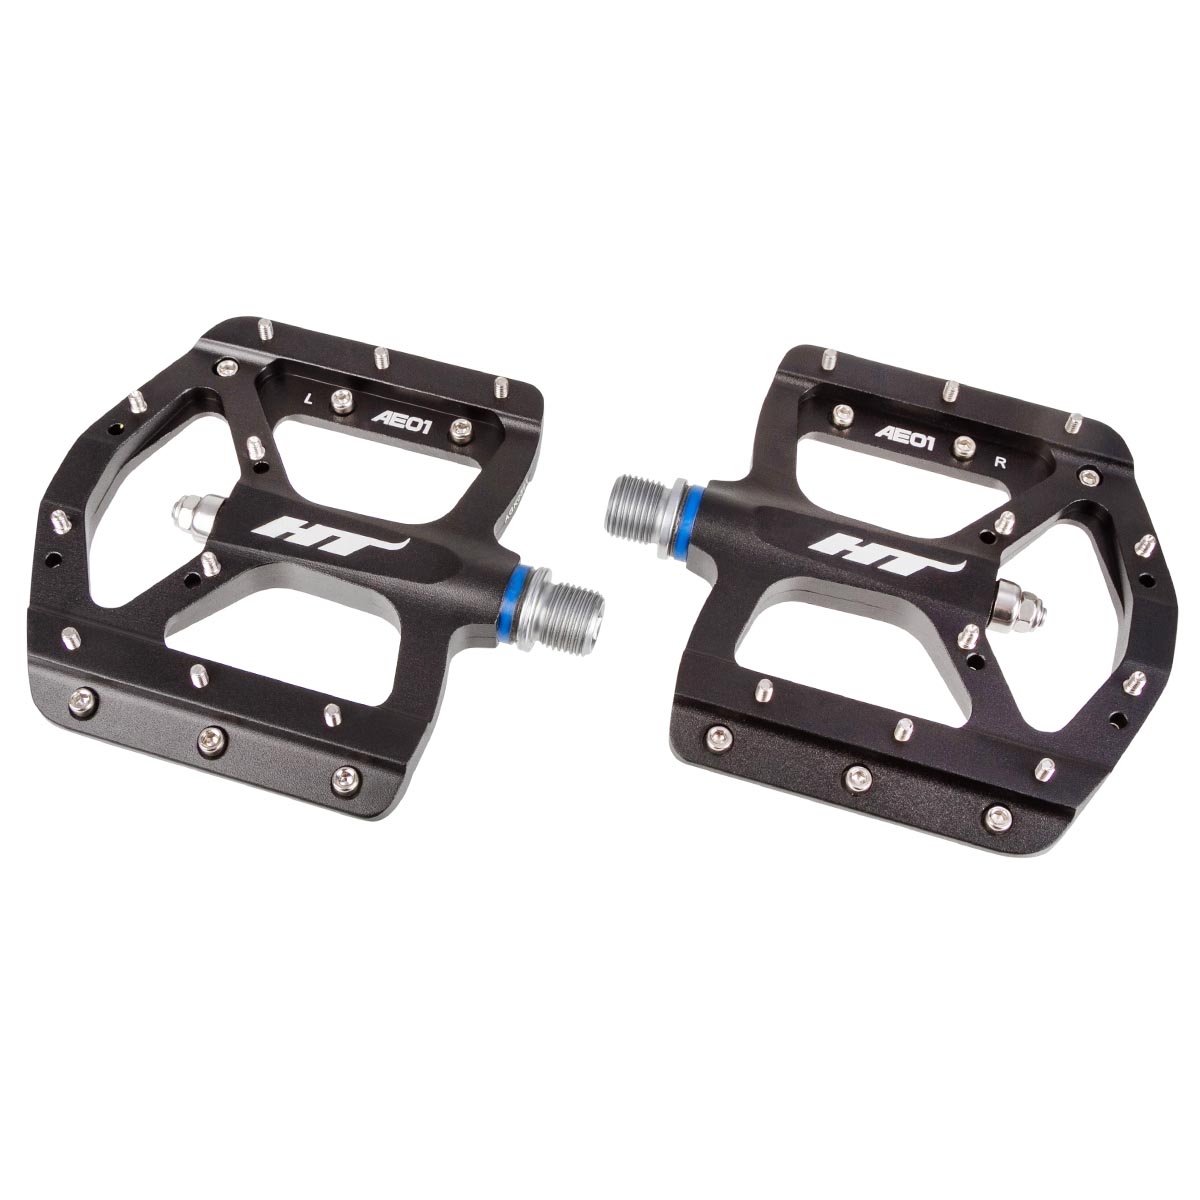 HT Components Pedals AE01 Black